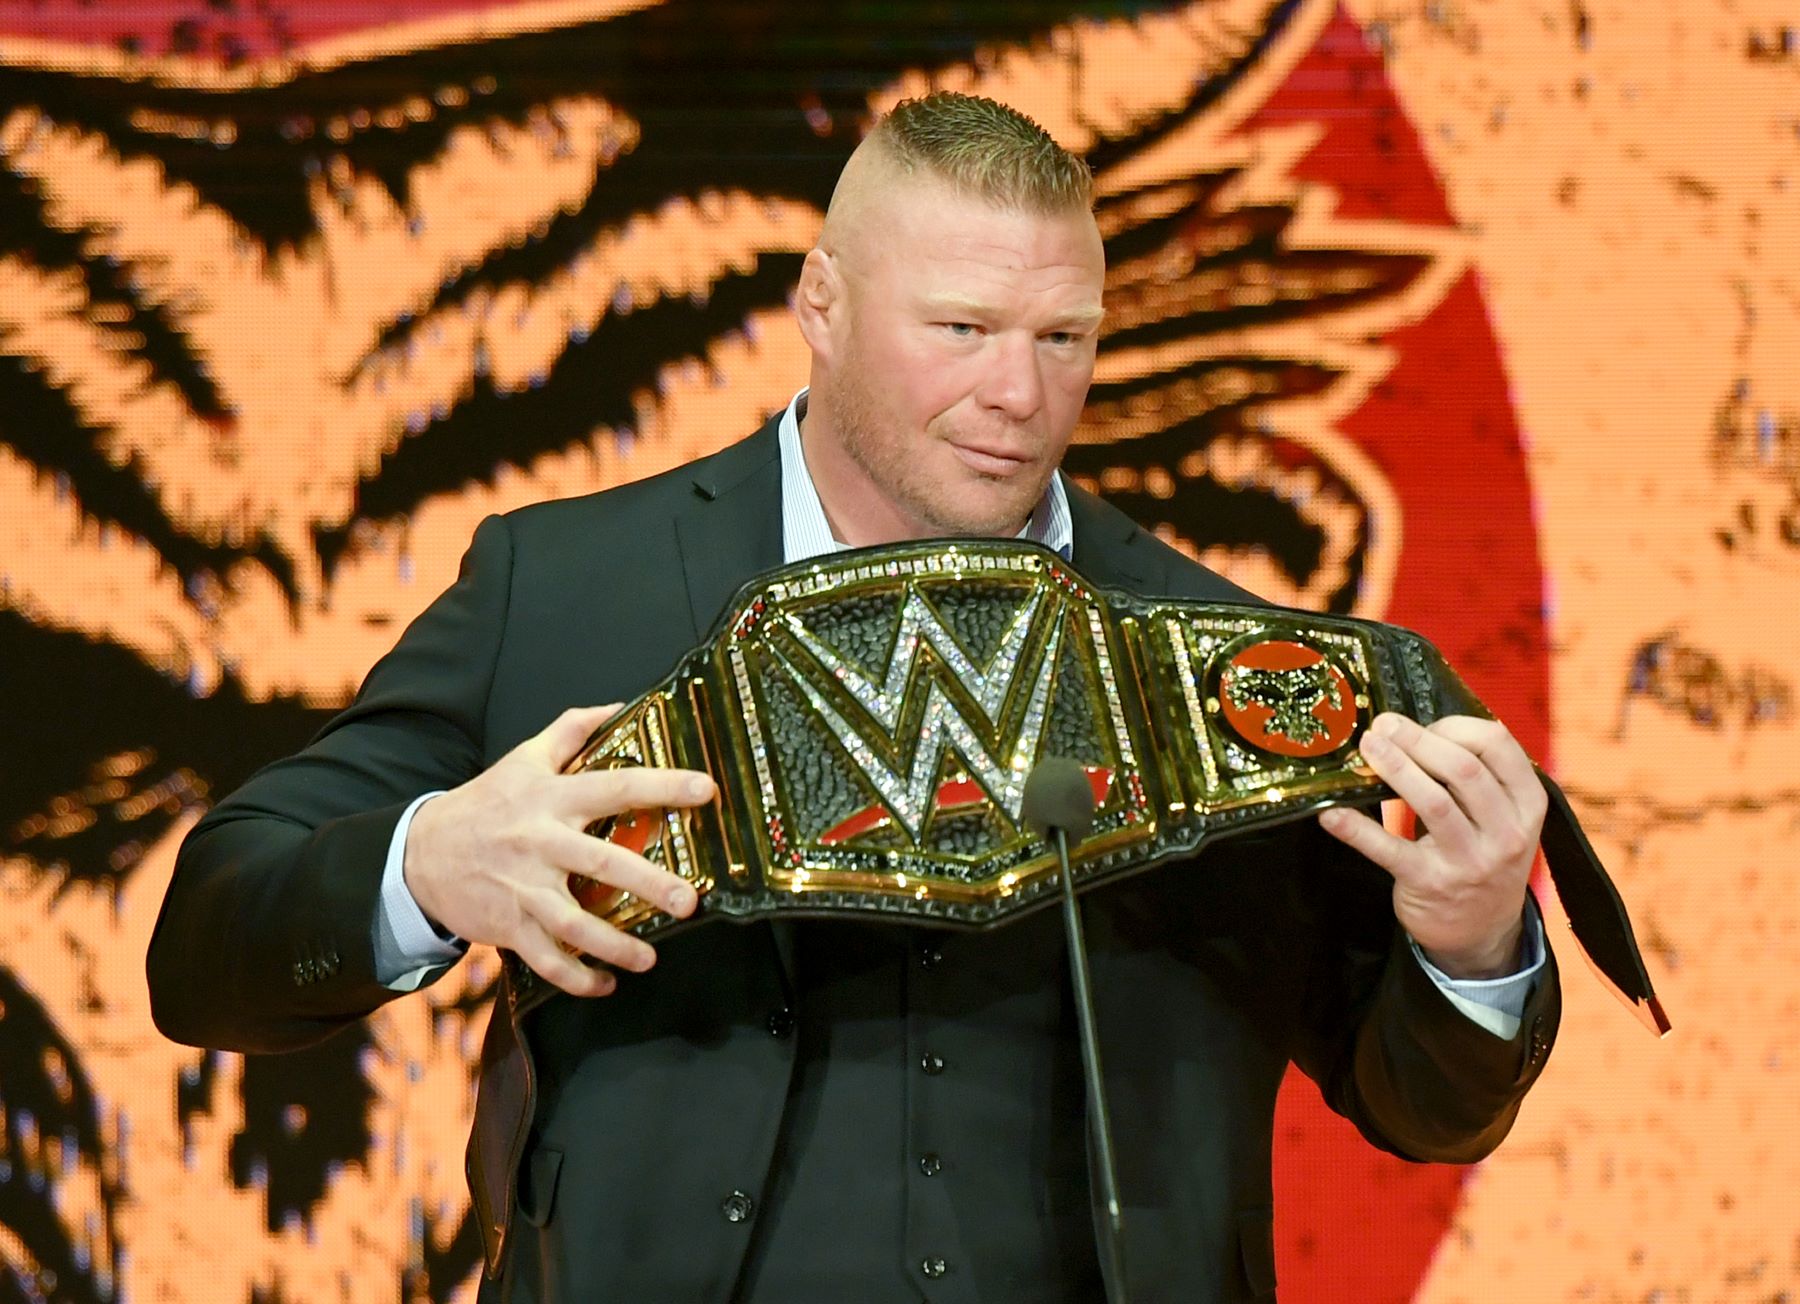 WWE champion Brock Lesnar at a press conference to announce a fight against the UFC heavyweight champion Cain Velasquez